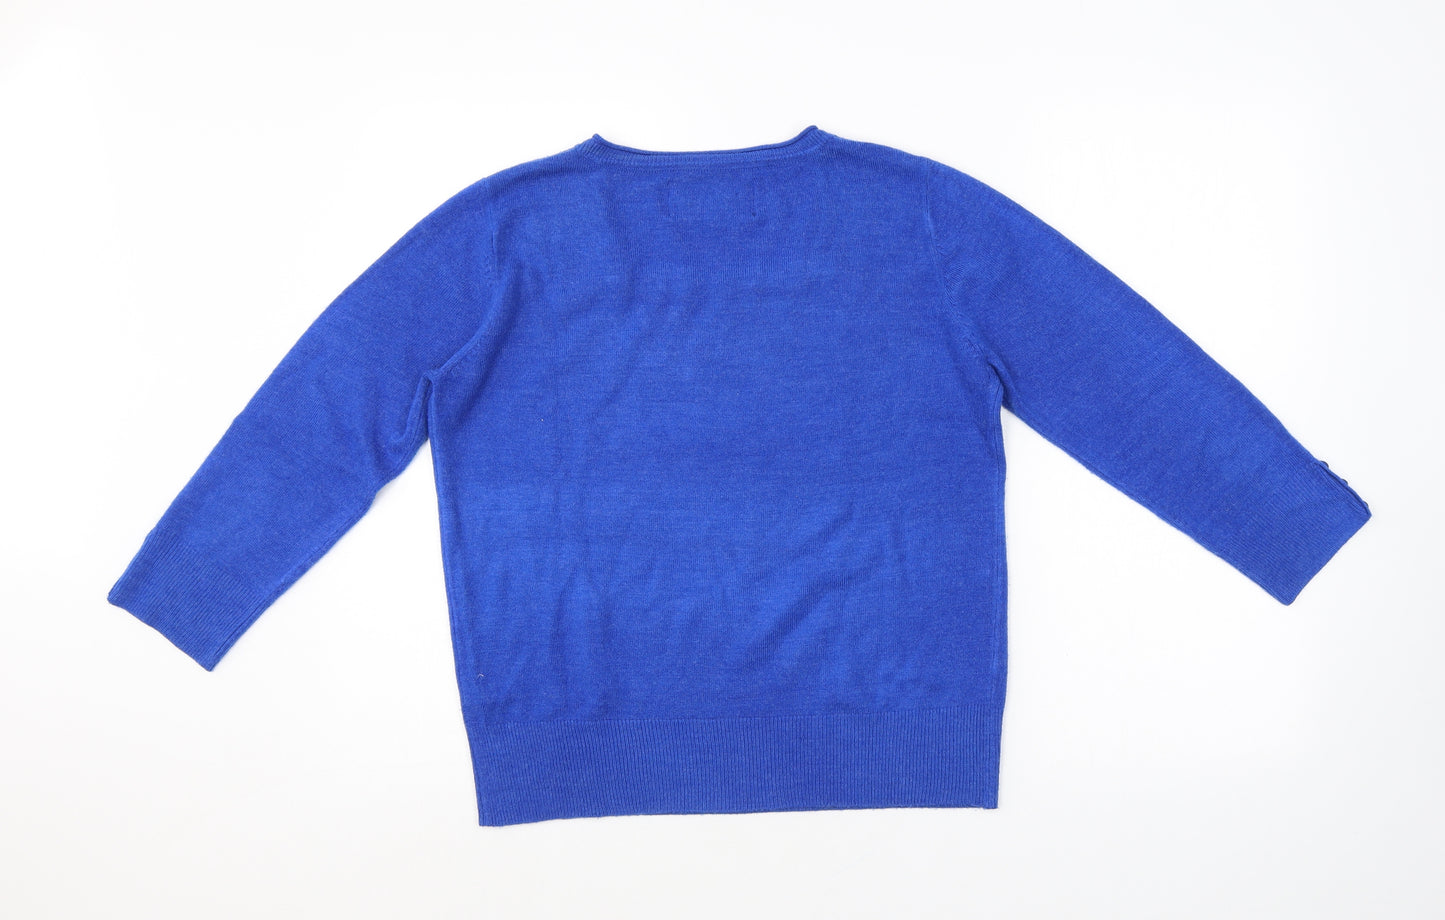 Maine Womens Blue Square Neck Acrylic Pullover Jumper Size 12